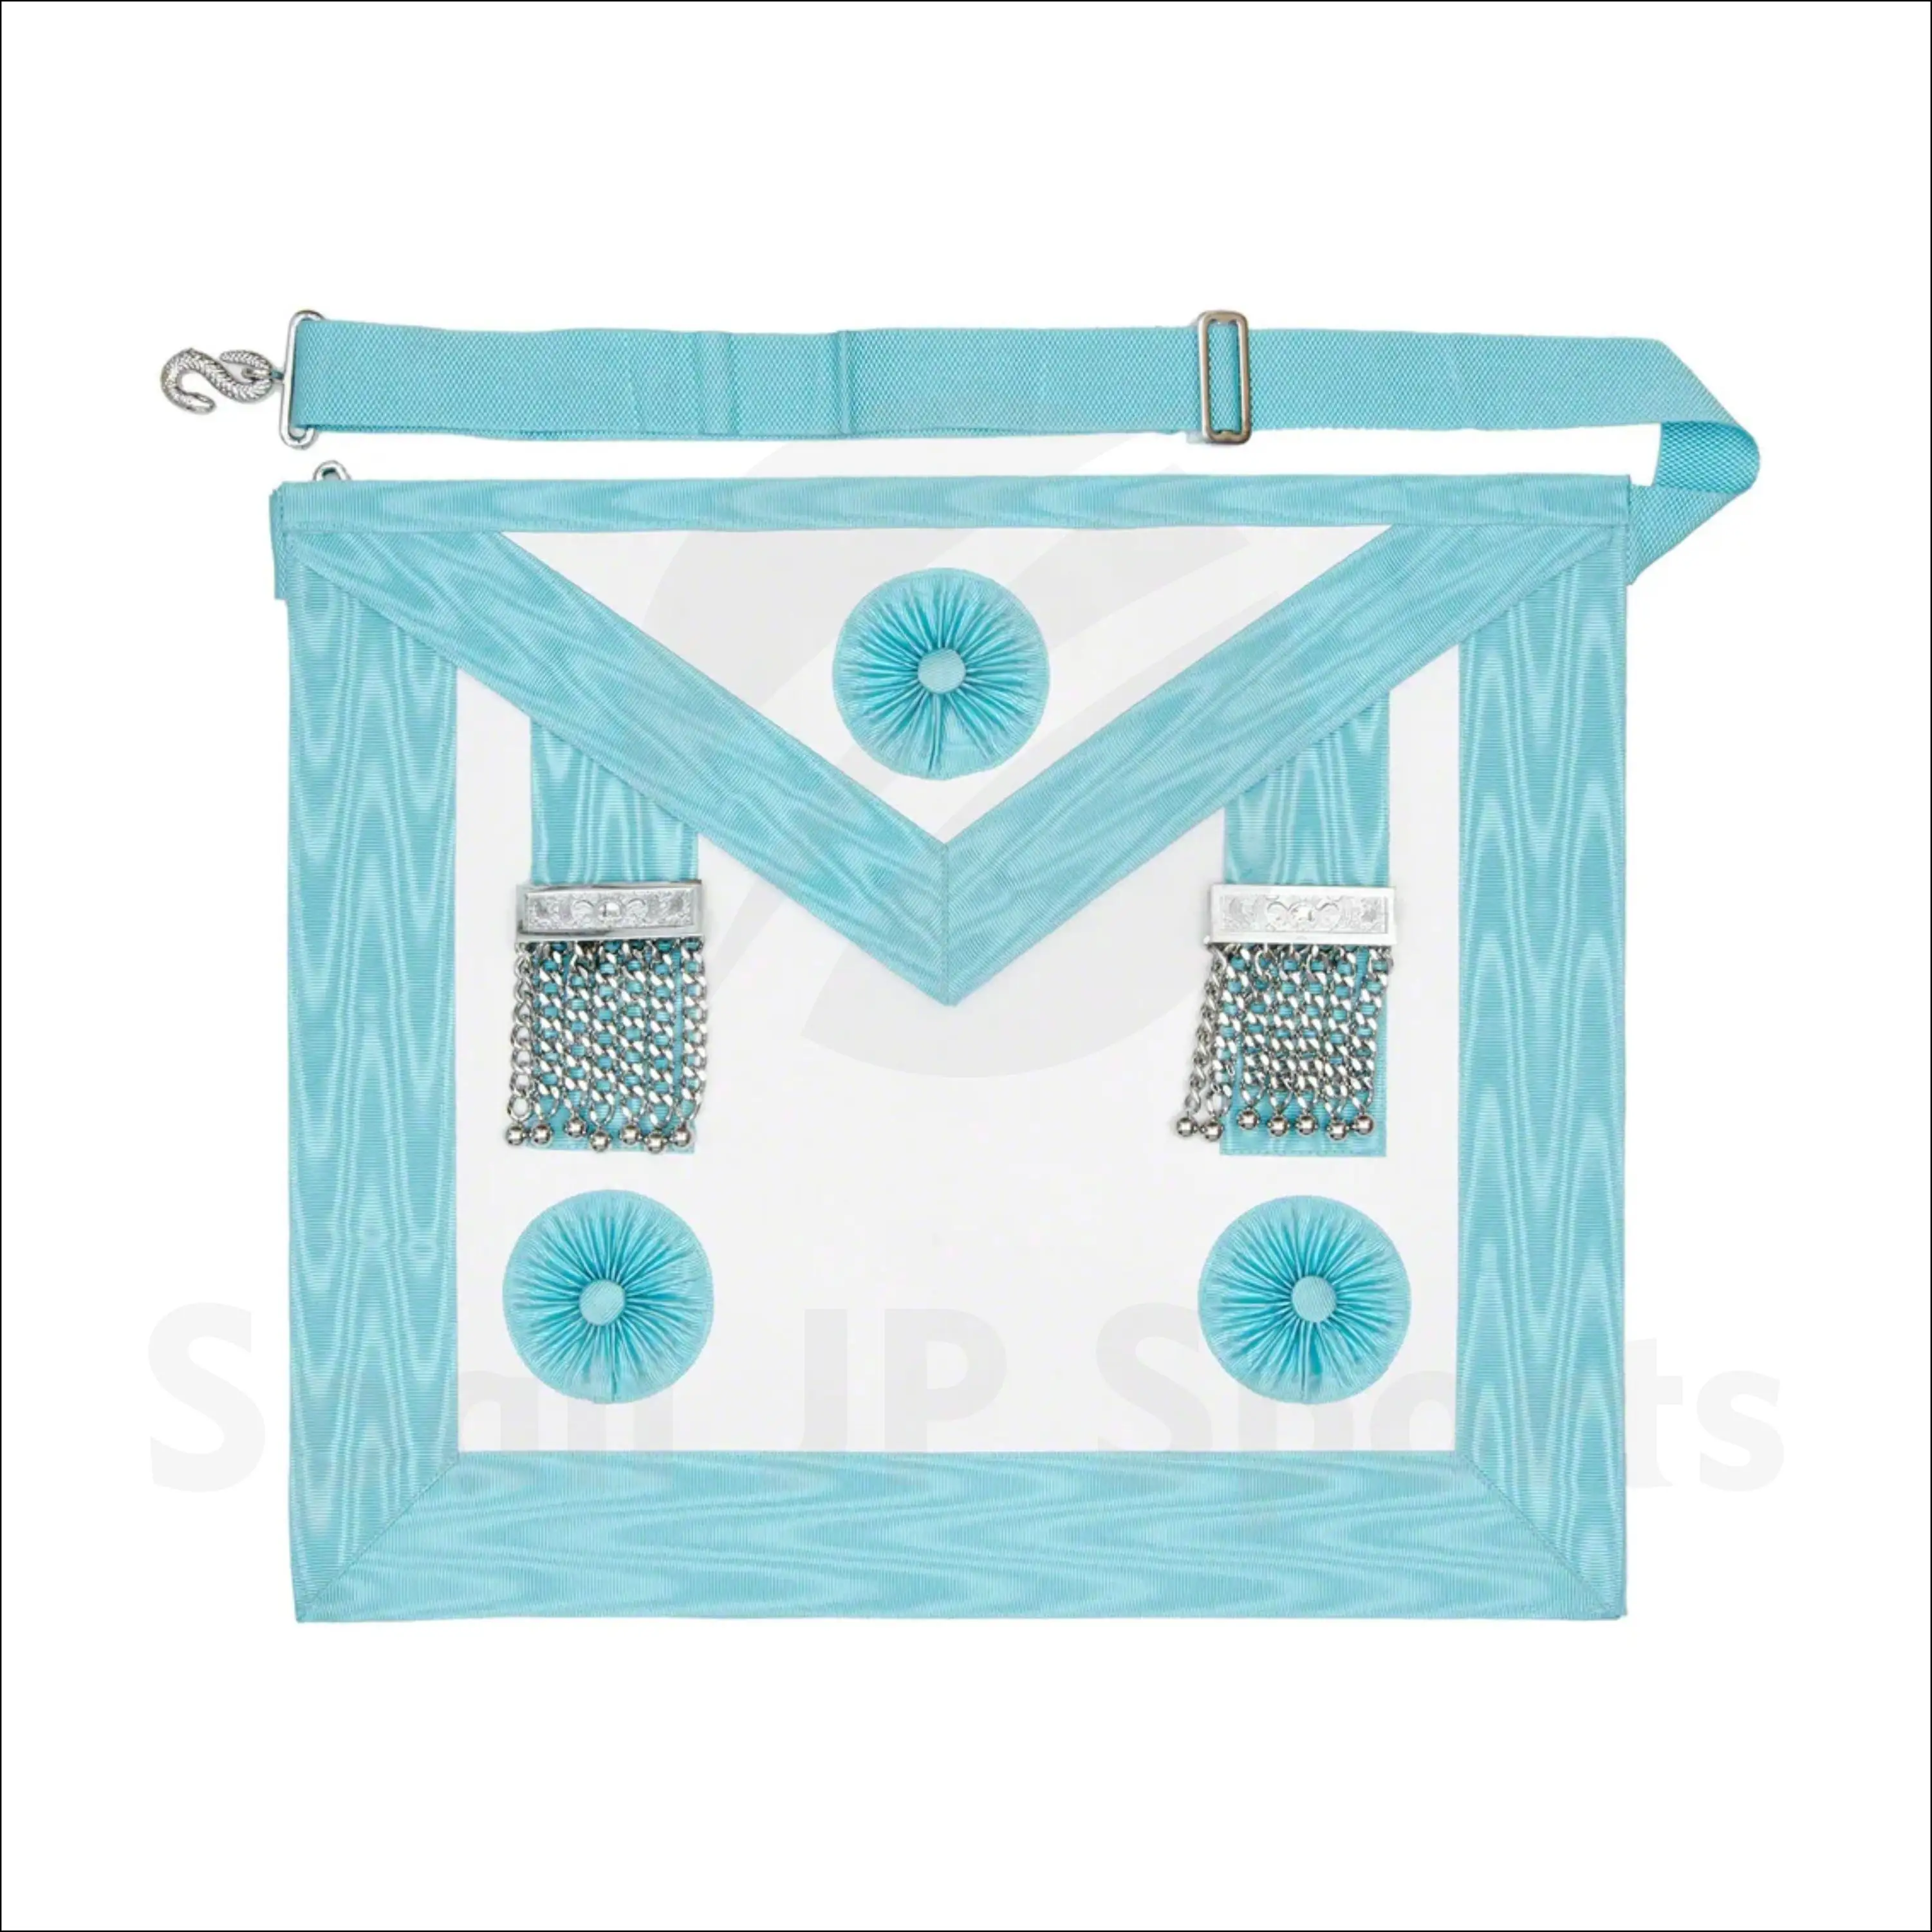 Factory Made Grand Chapter Royal Arch Masonic Regalia lambskin hand made Apron with rear pocket